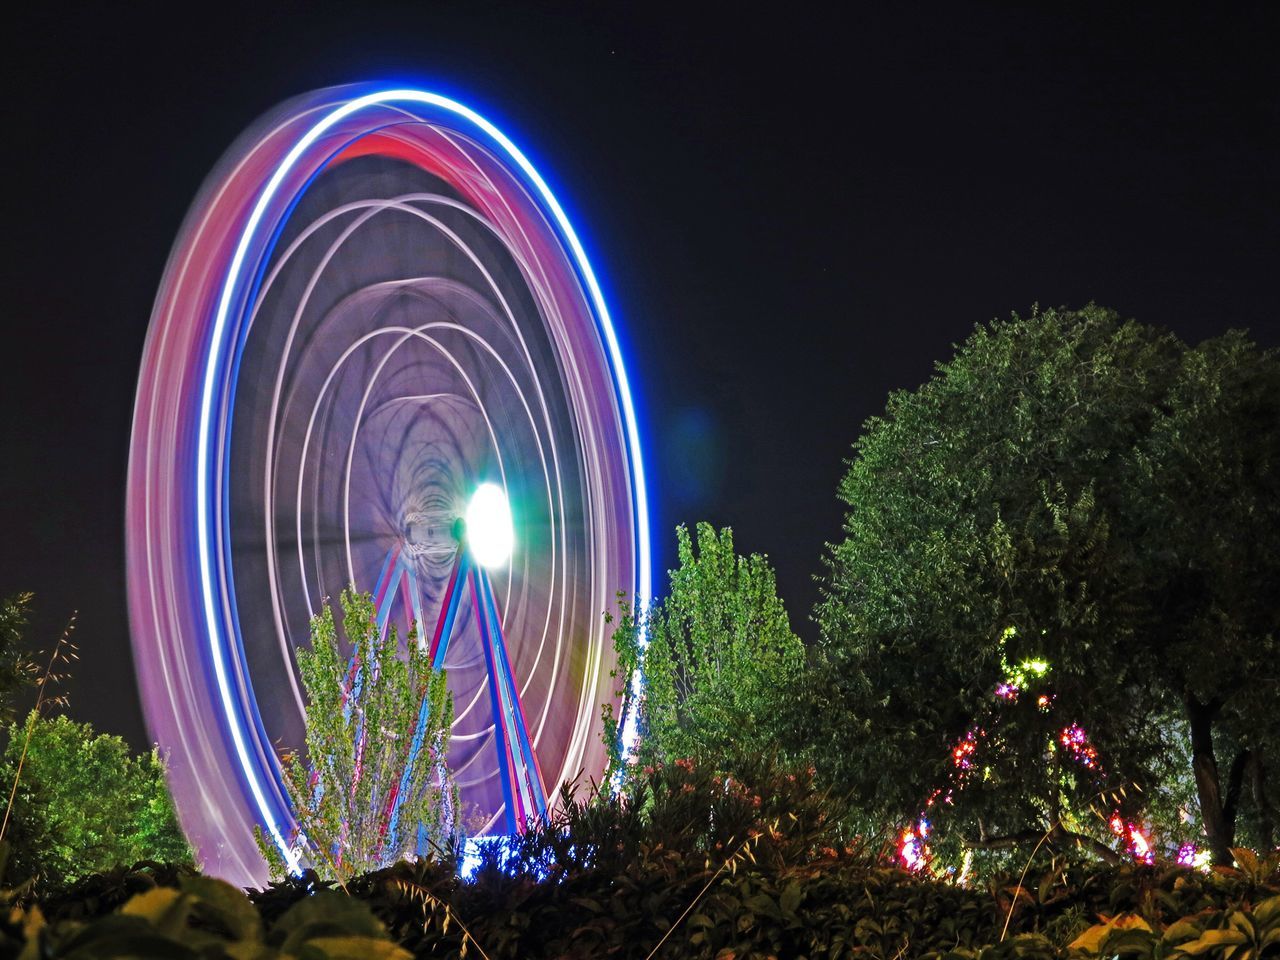 night, illuminated, tree, low angle view, clear sky, arts culture and entertainment, multi colored, built structure, architecture, ferris wheel, building exterior, blue, circle, lighting equipment, outdoors, amusement park, sky, long exposure, amusement park ride, copy space